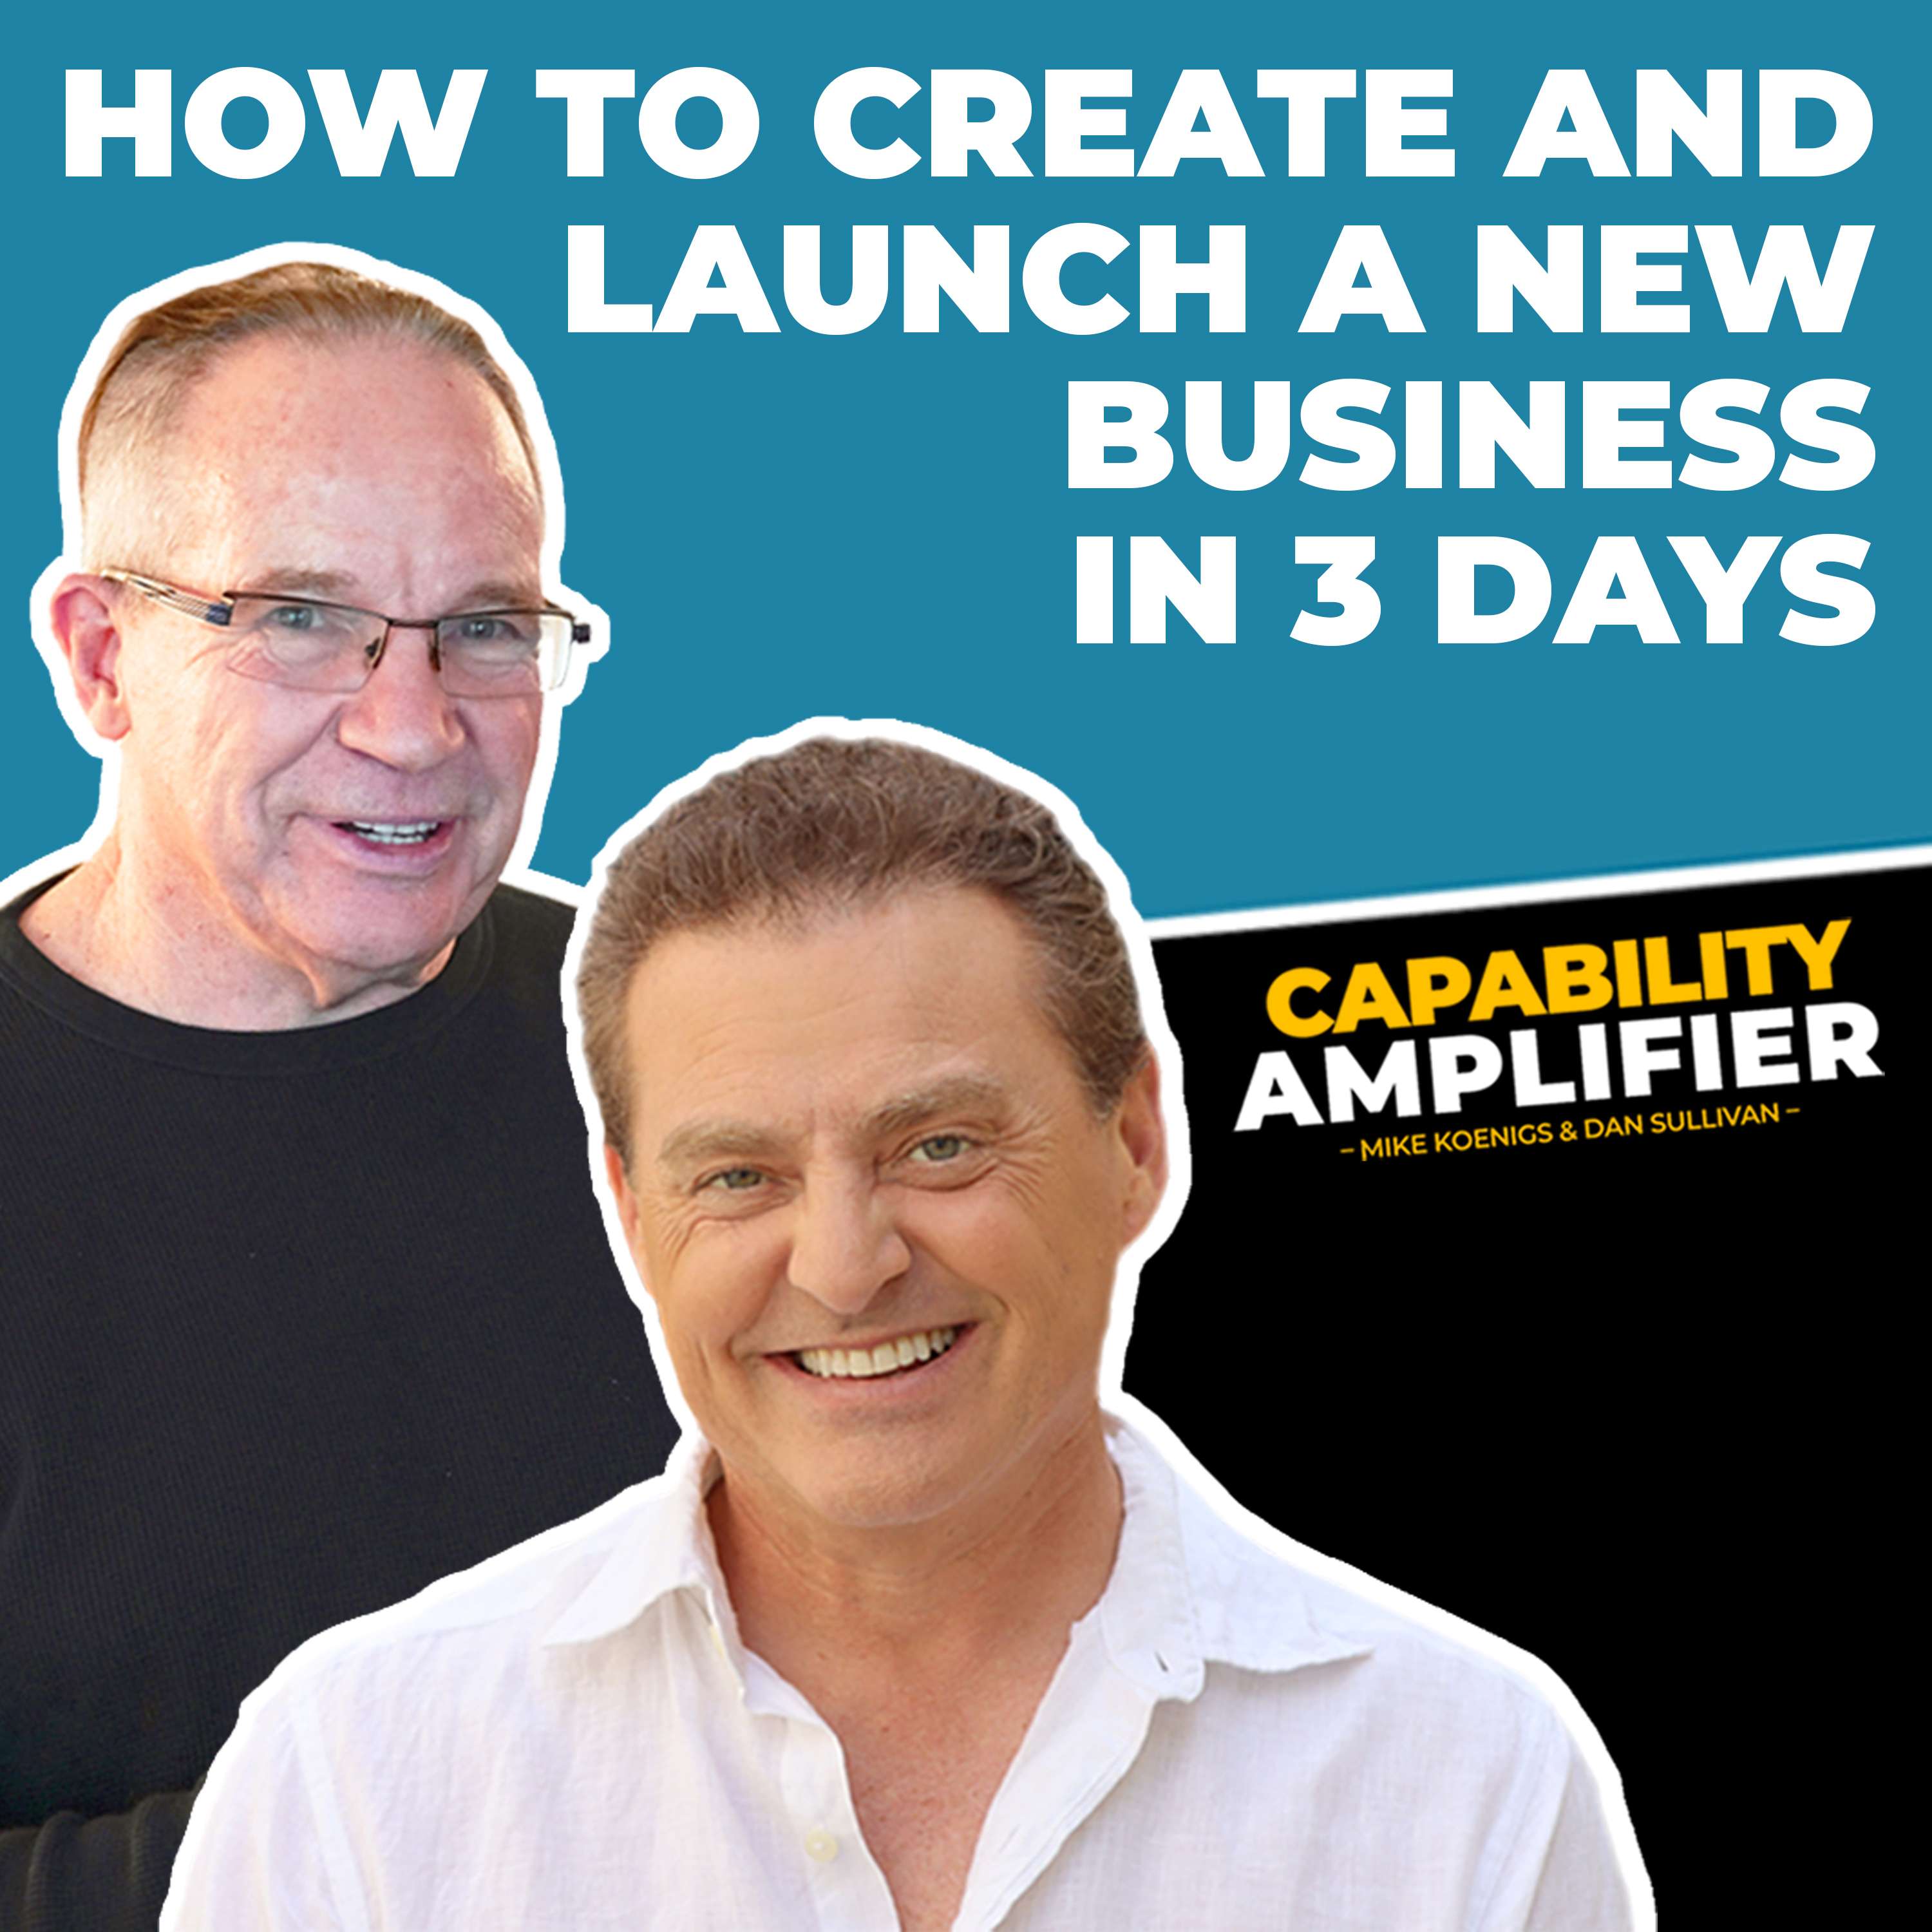 How To Create and Launch a New Business in 3 Days